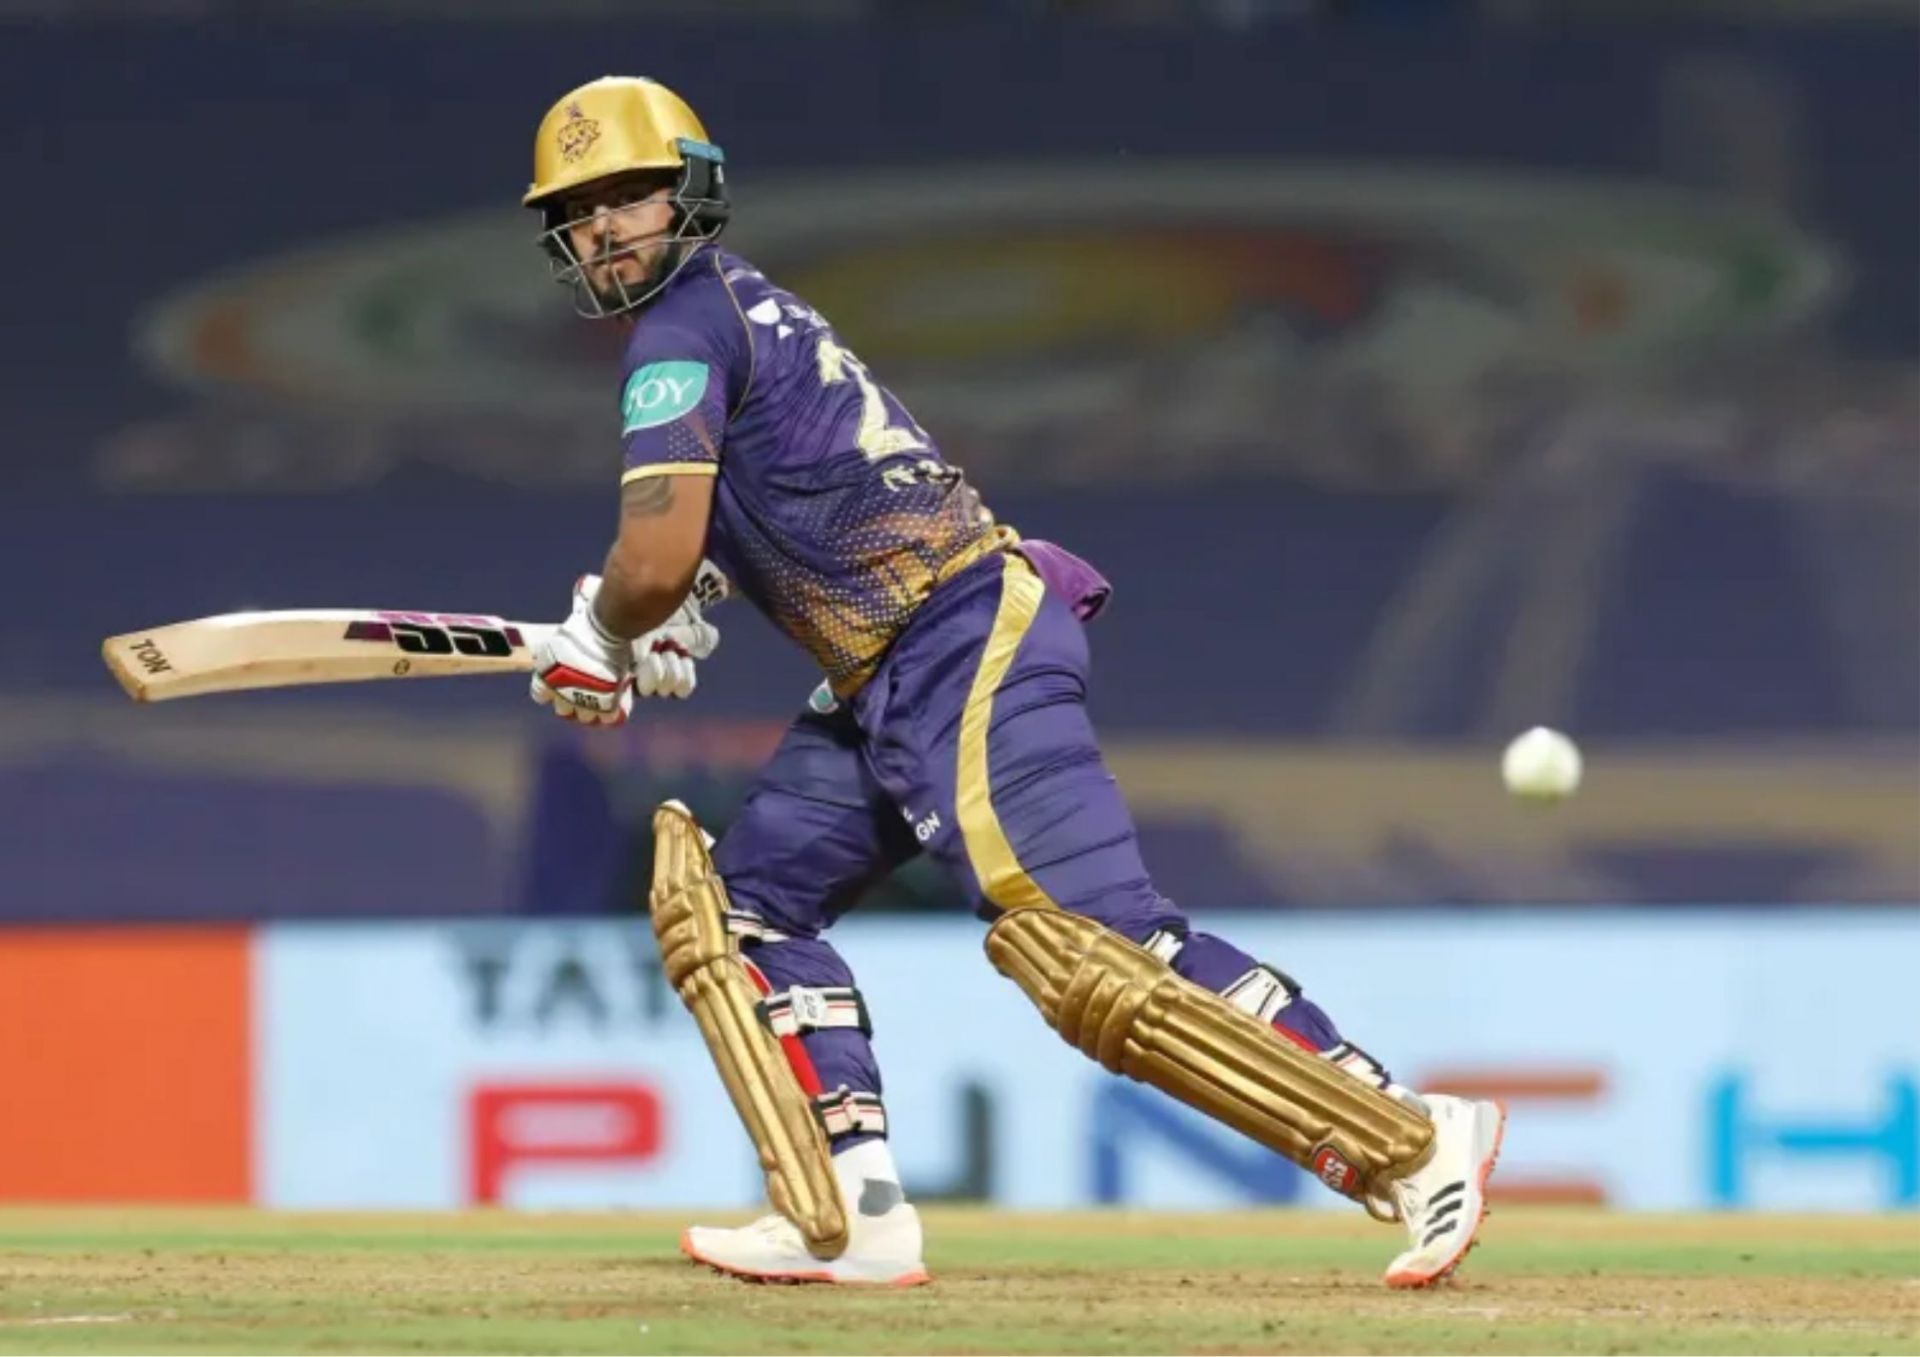 Nitish Rana will lead KKR as long as Shreyas Iyer remains unavailable for IPL 2023 (Picture Credits: IPL).